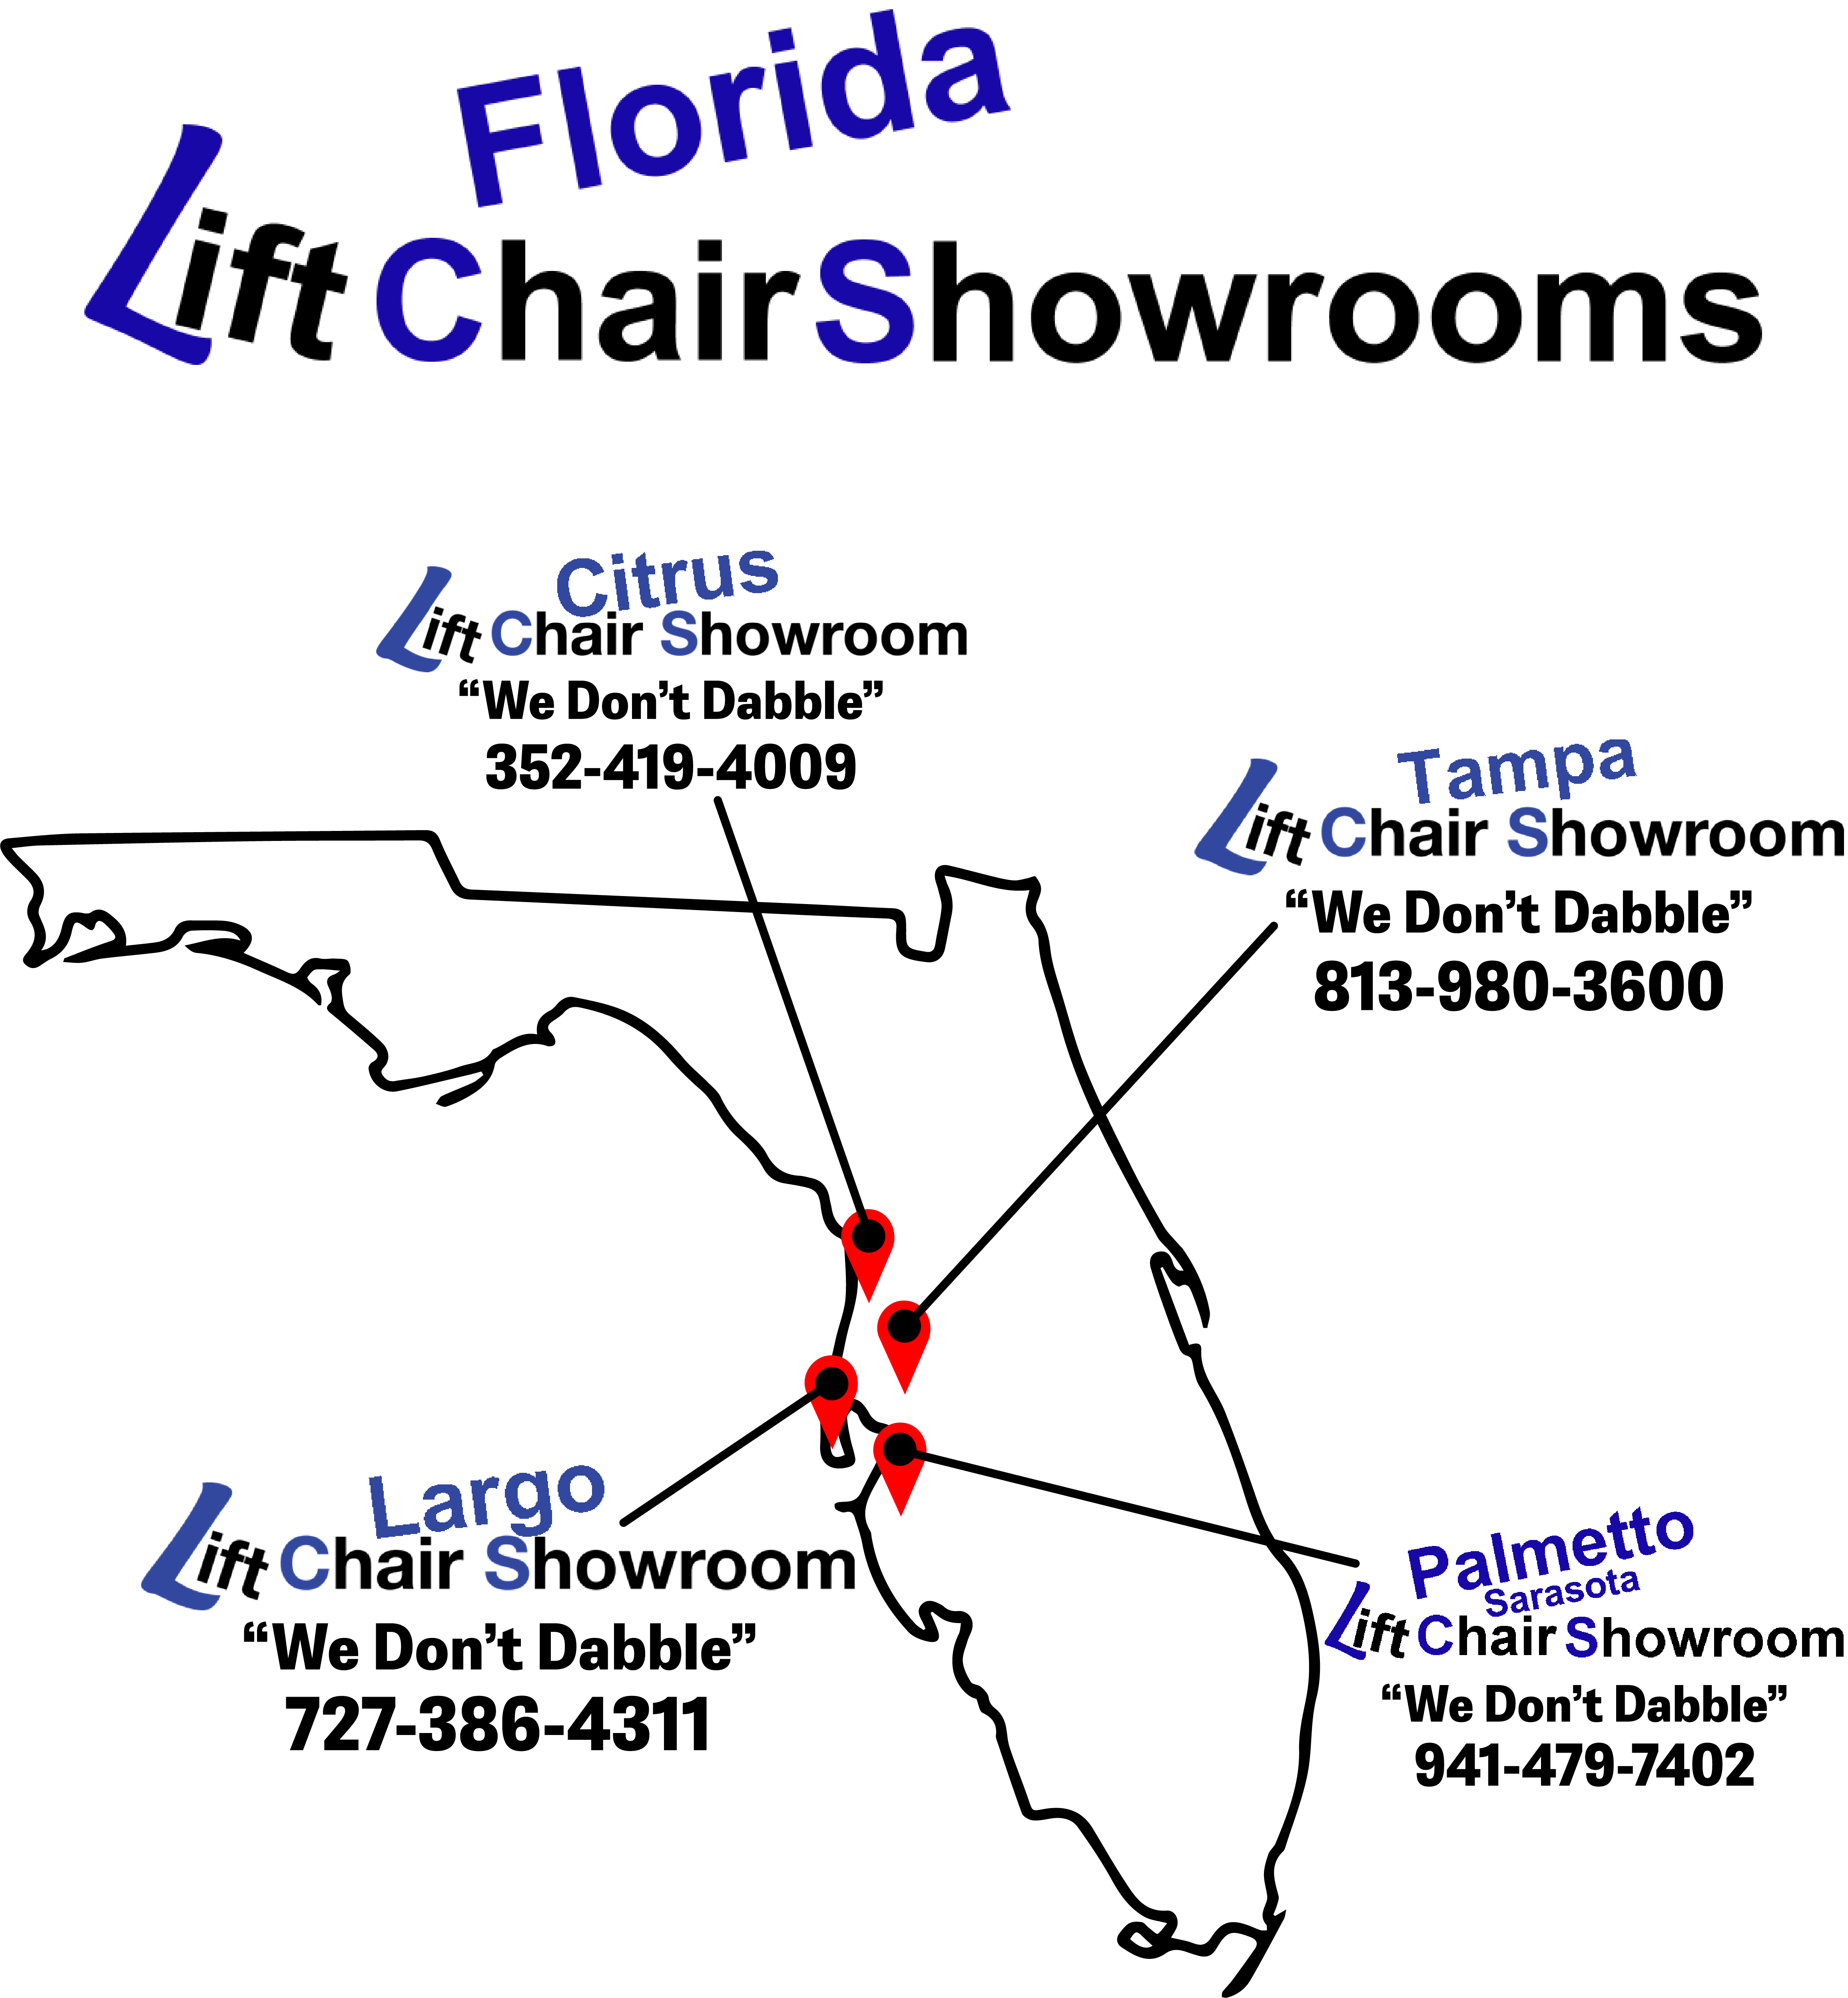 Lift Chair locations in Tampa, Largo, Citrus, & Pamletto.